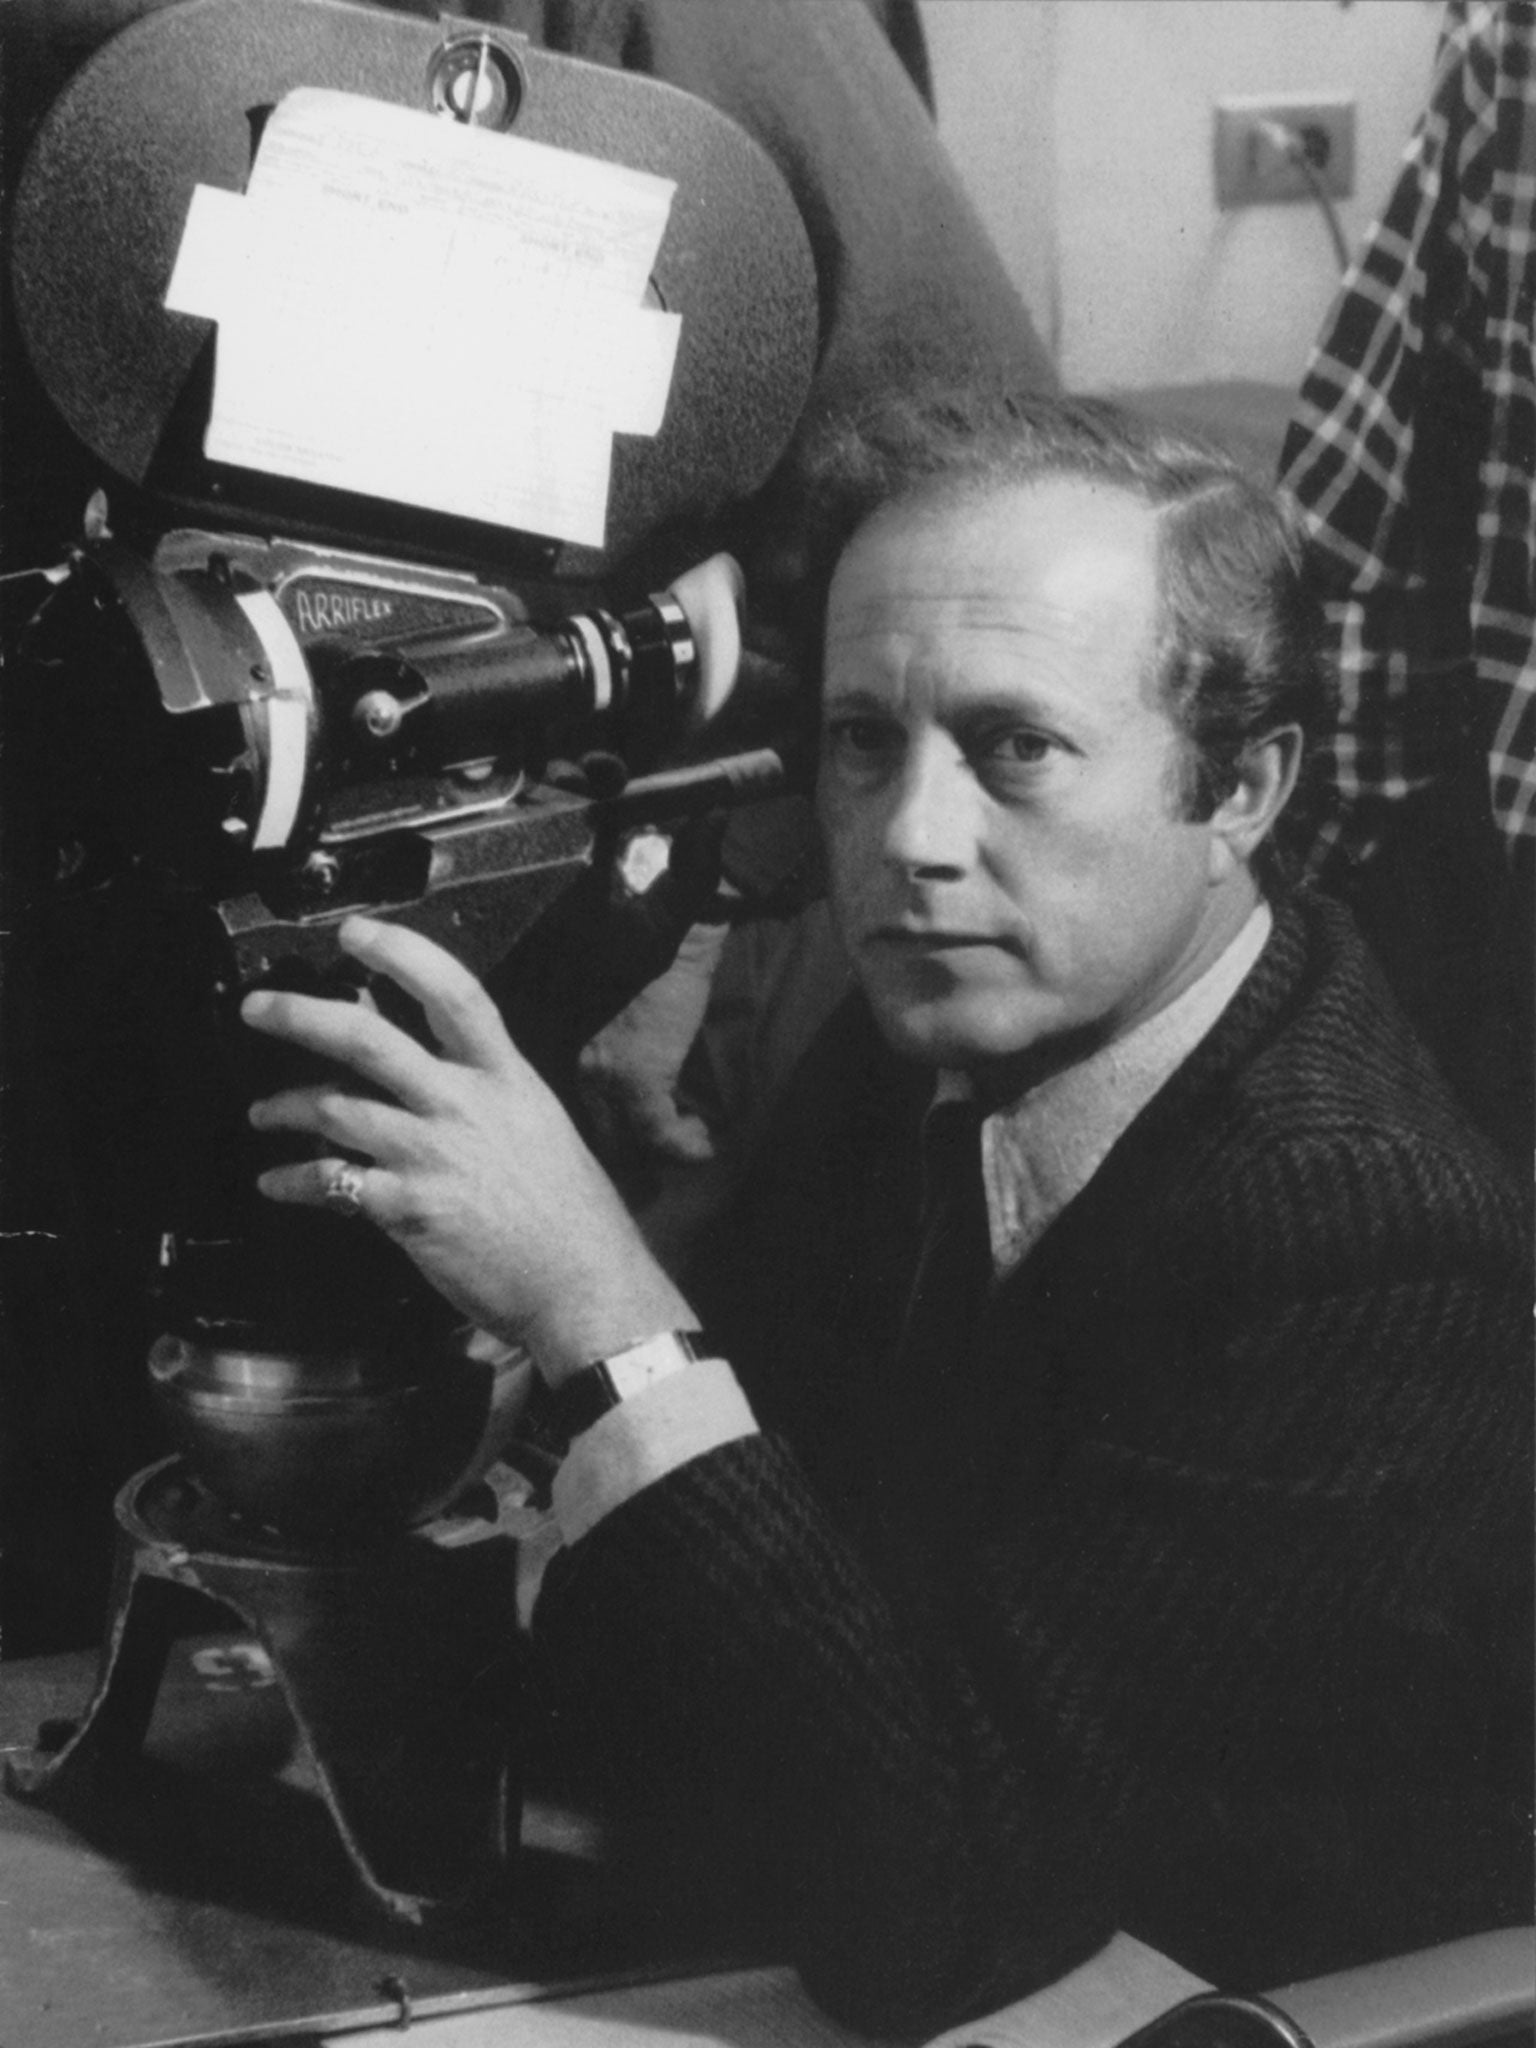 Nicolas Roeg, pictured earlier in his career, is now 84. His writing style is modest, conversational, philosophical and full of conviction